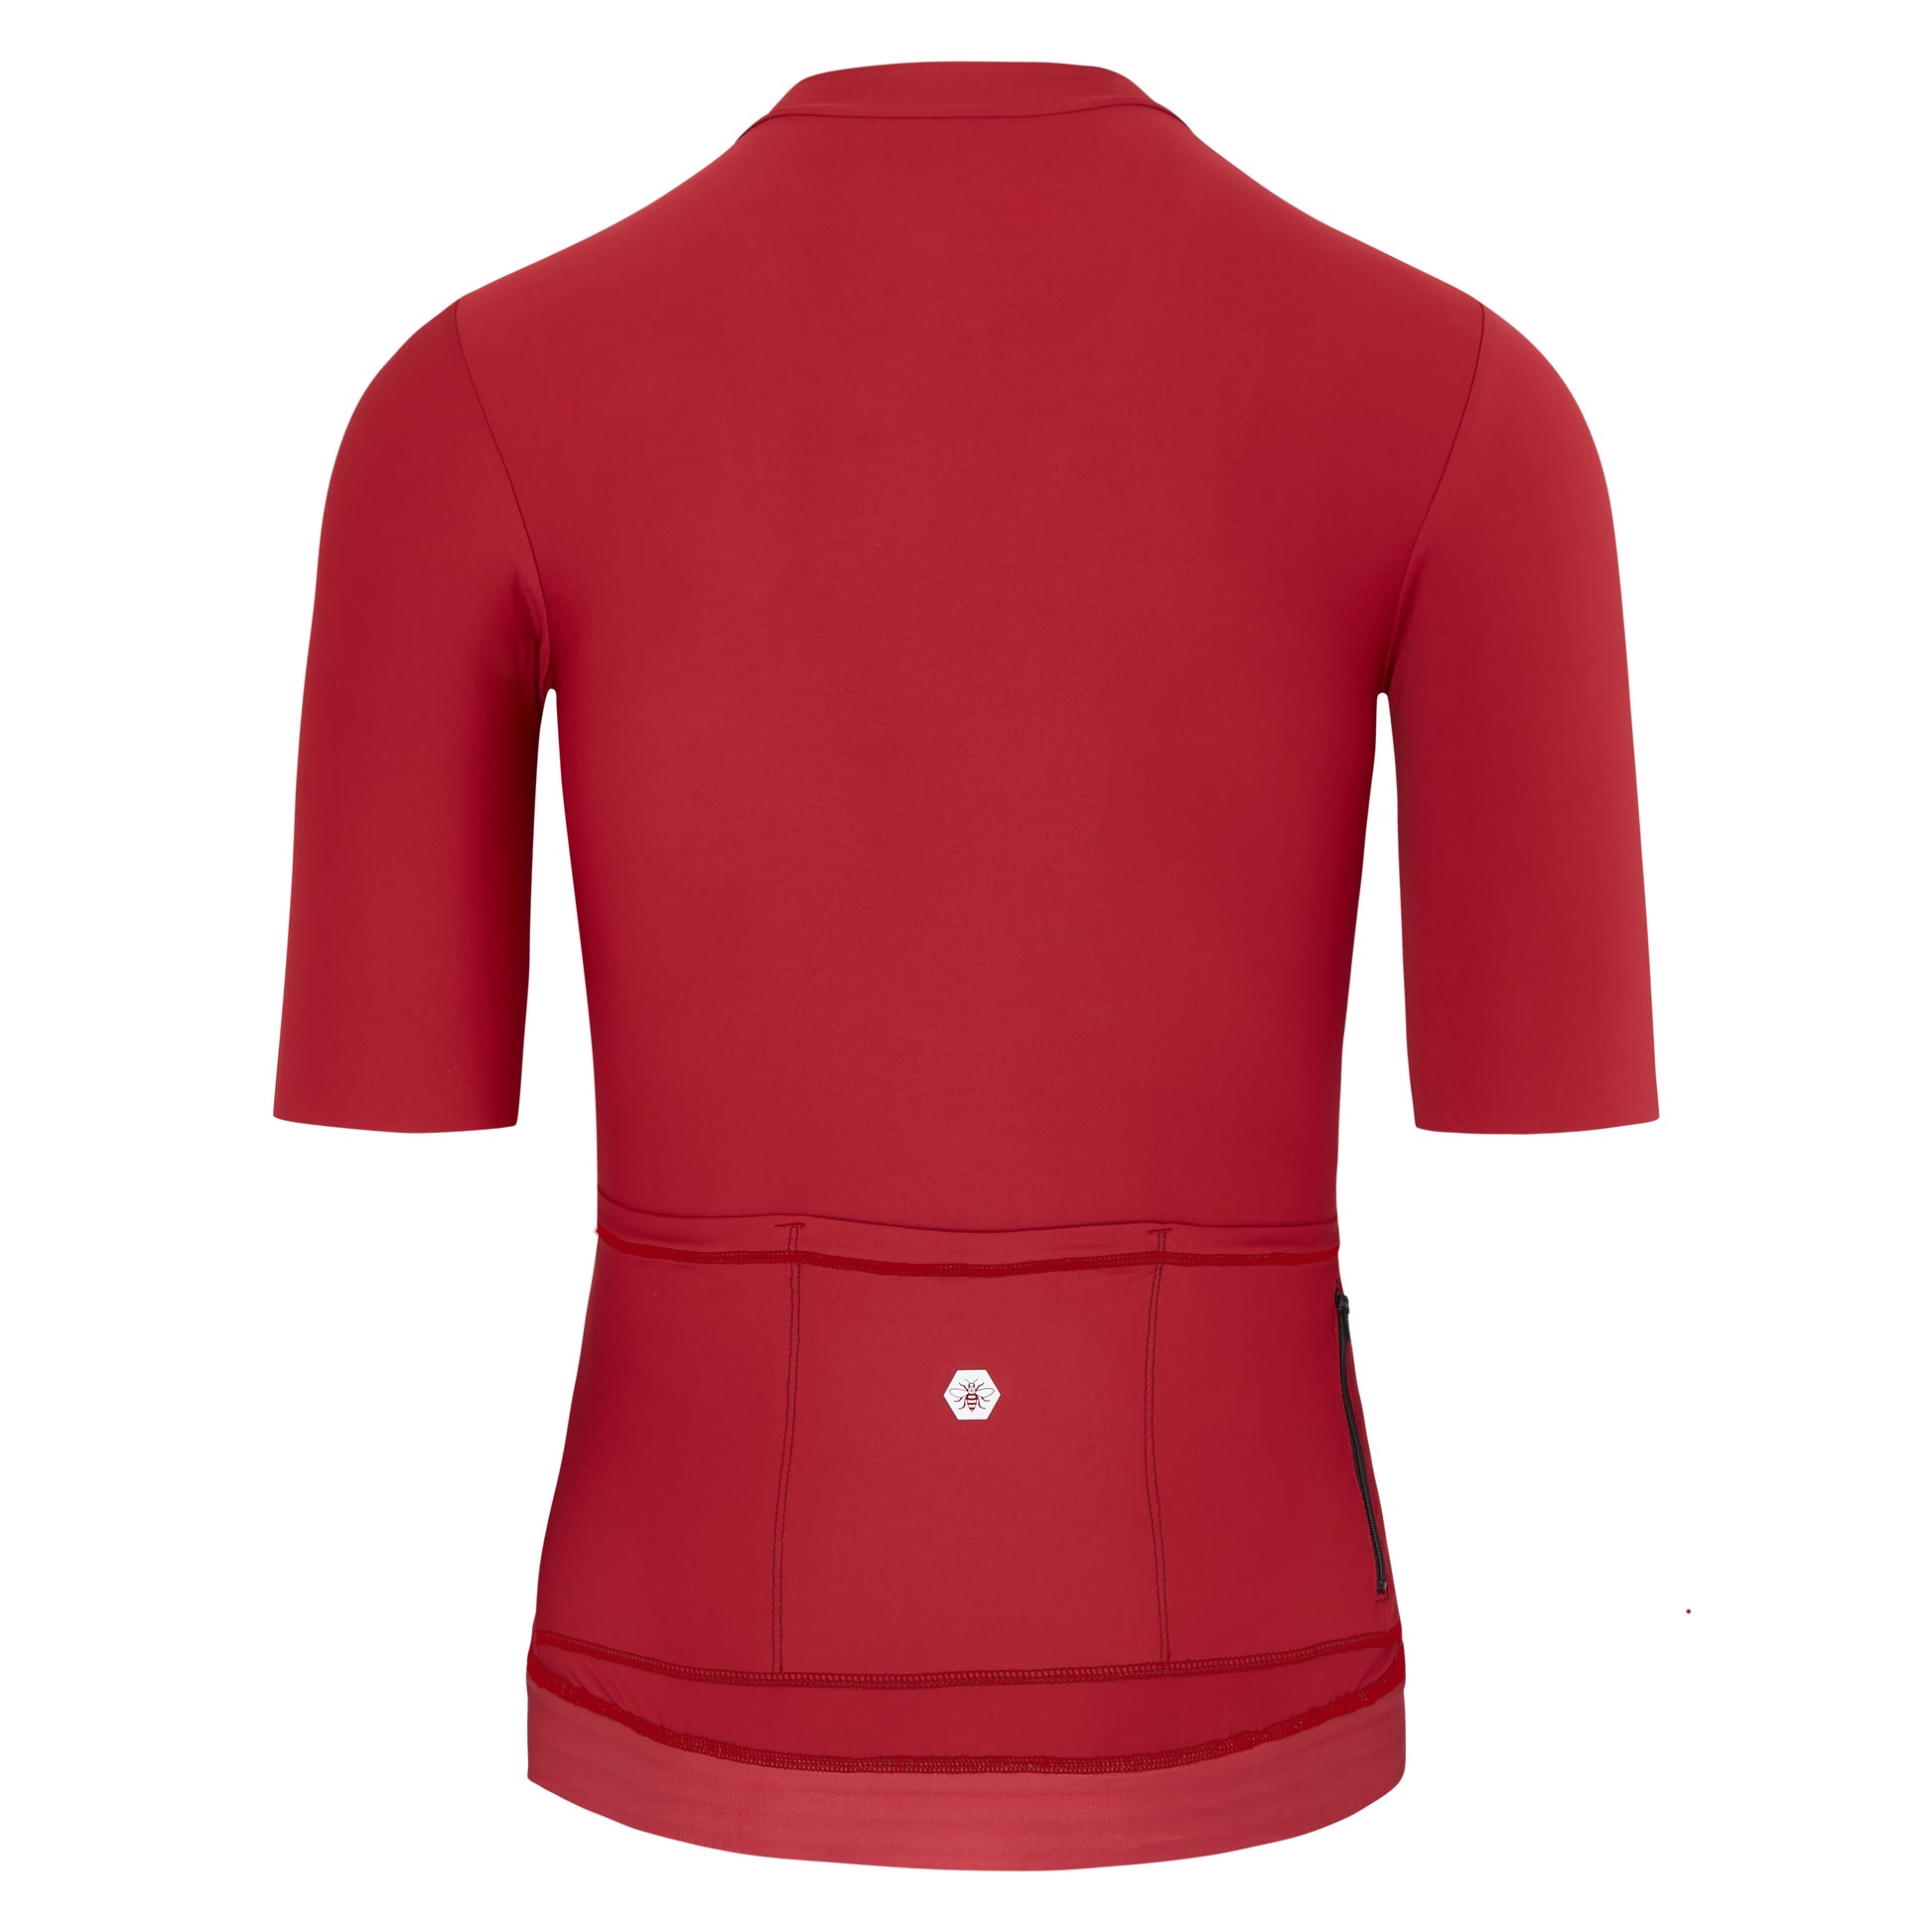 Paragon Jersey - Lusso Cycle Wear